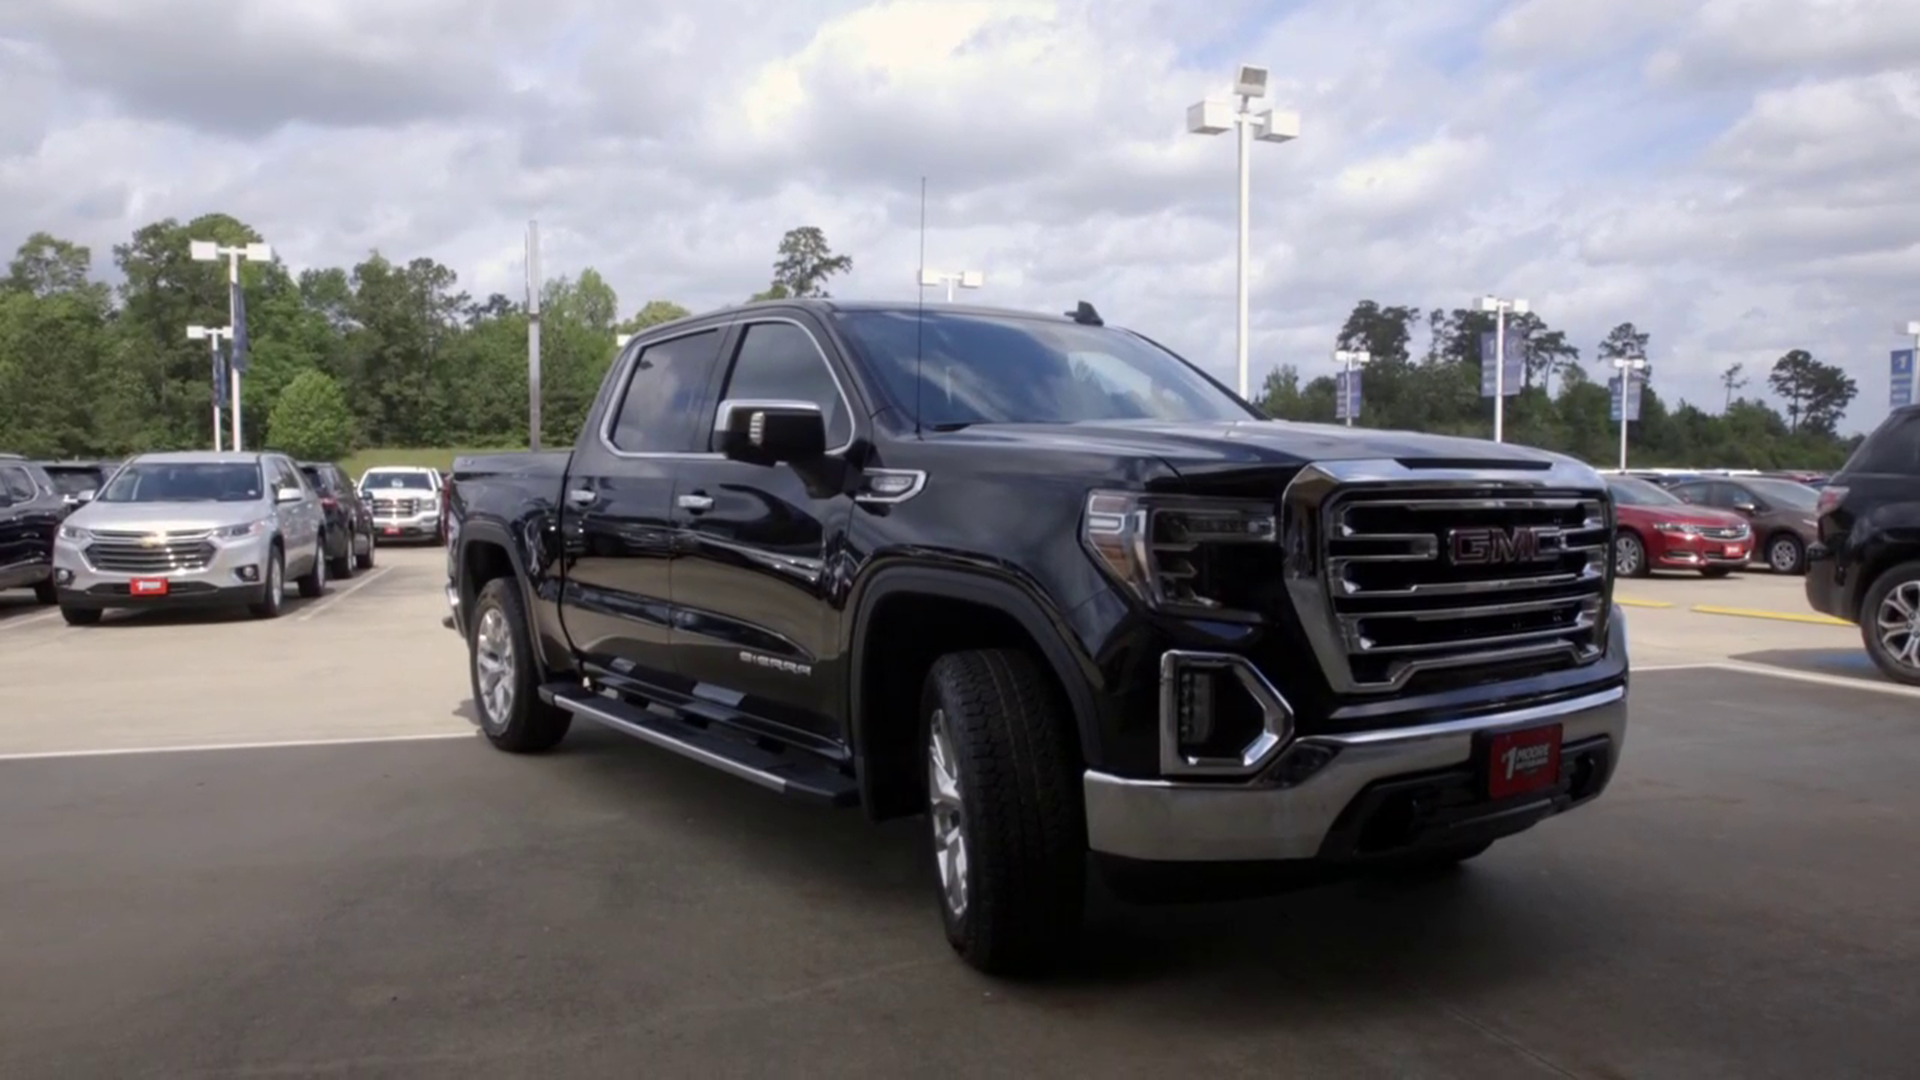 12News' Devin Medley takes a spin in a 2019 GMC Sierra pickup on 12News Test Drive